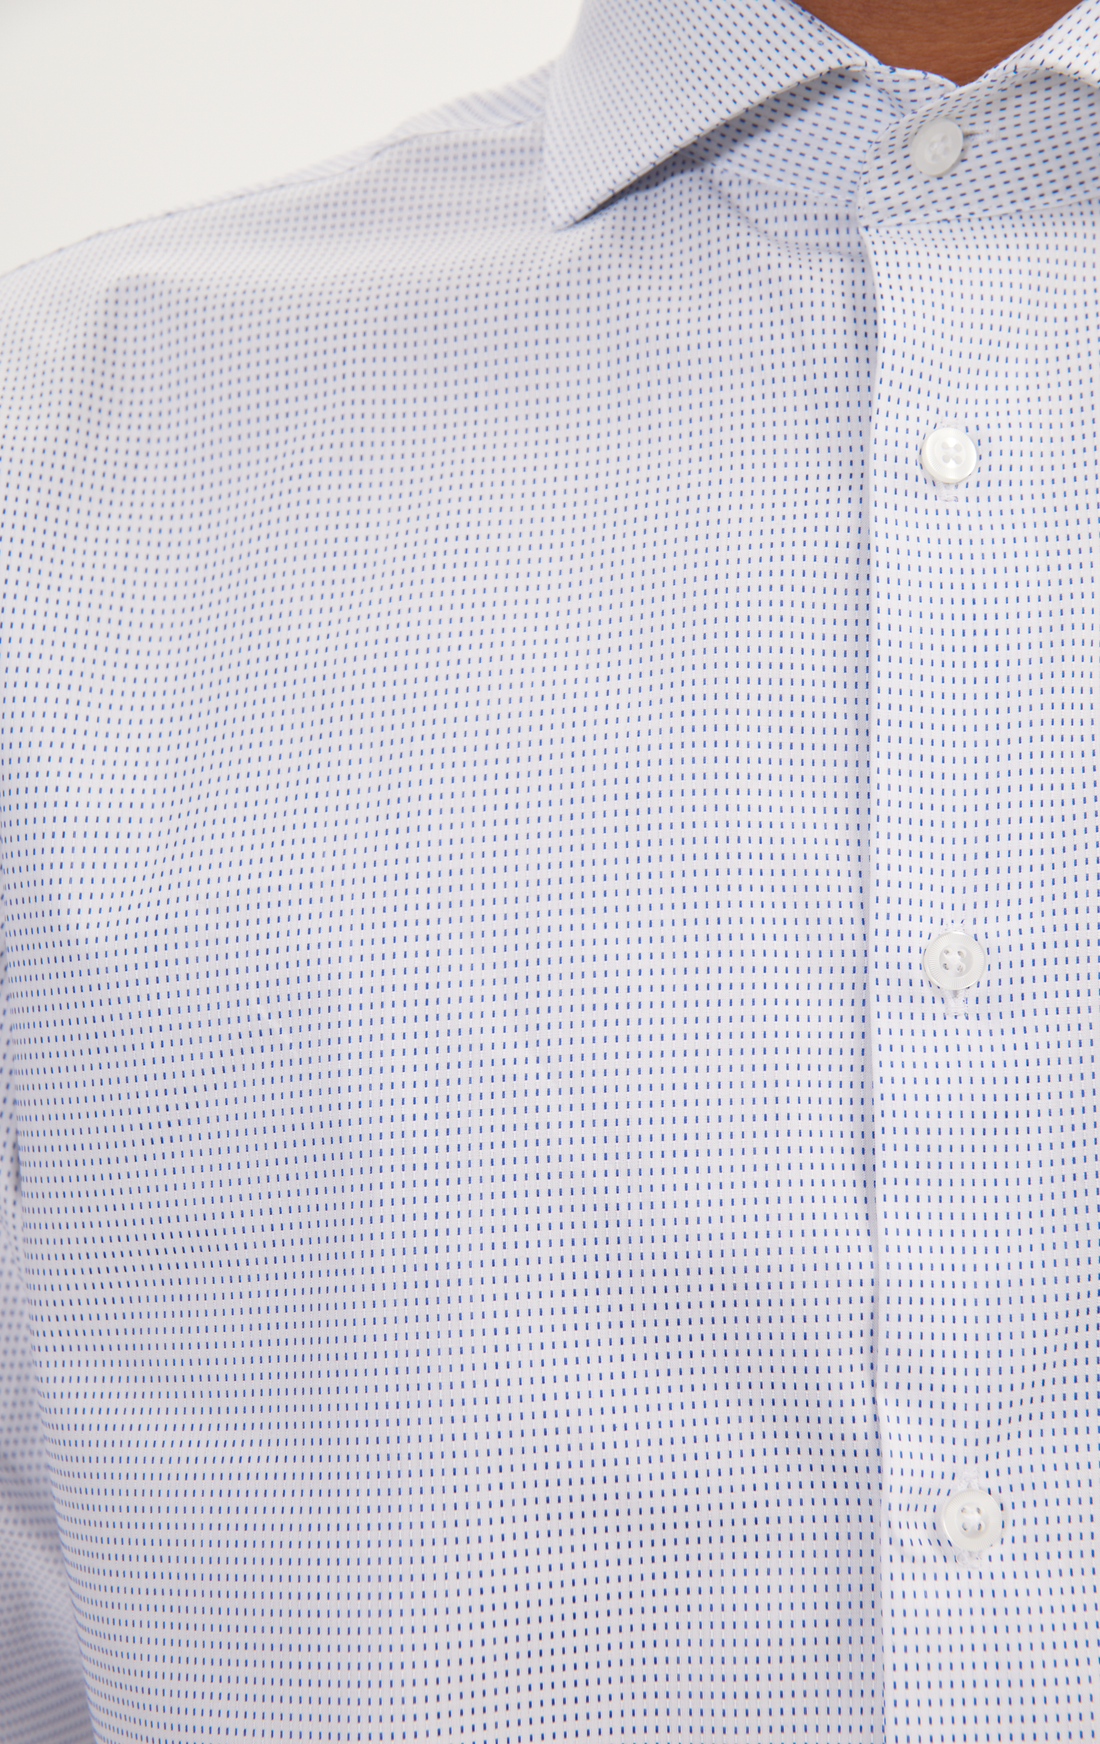 N° AN4903 PURE COTTON FRENCH PLACKET SPREAD COLLAR DRESS SHIRT - WHITE NAVY JACQUARD